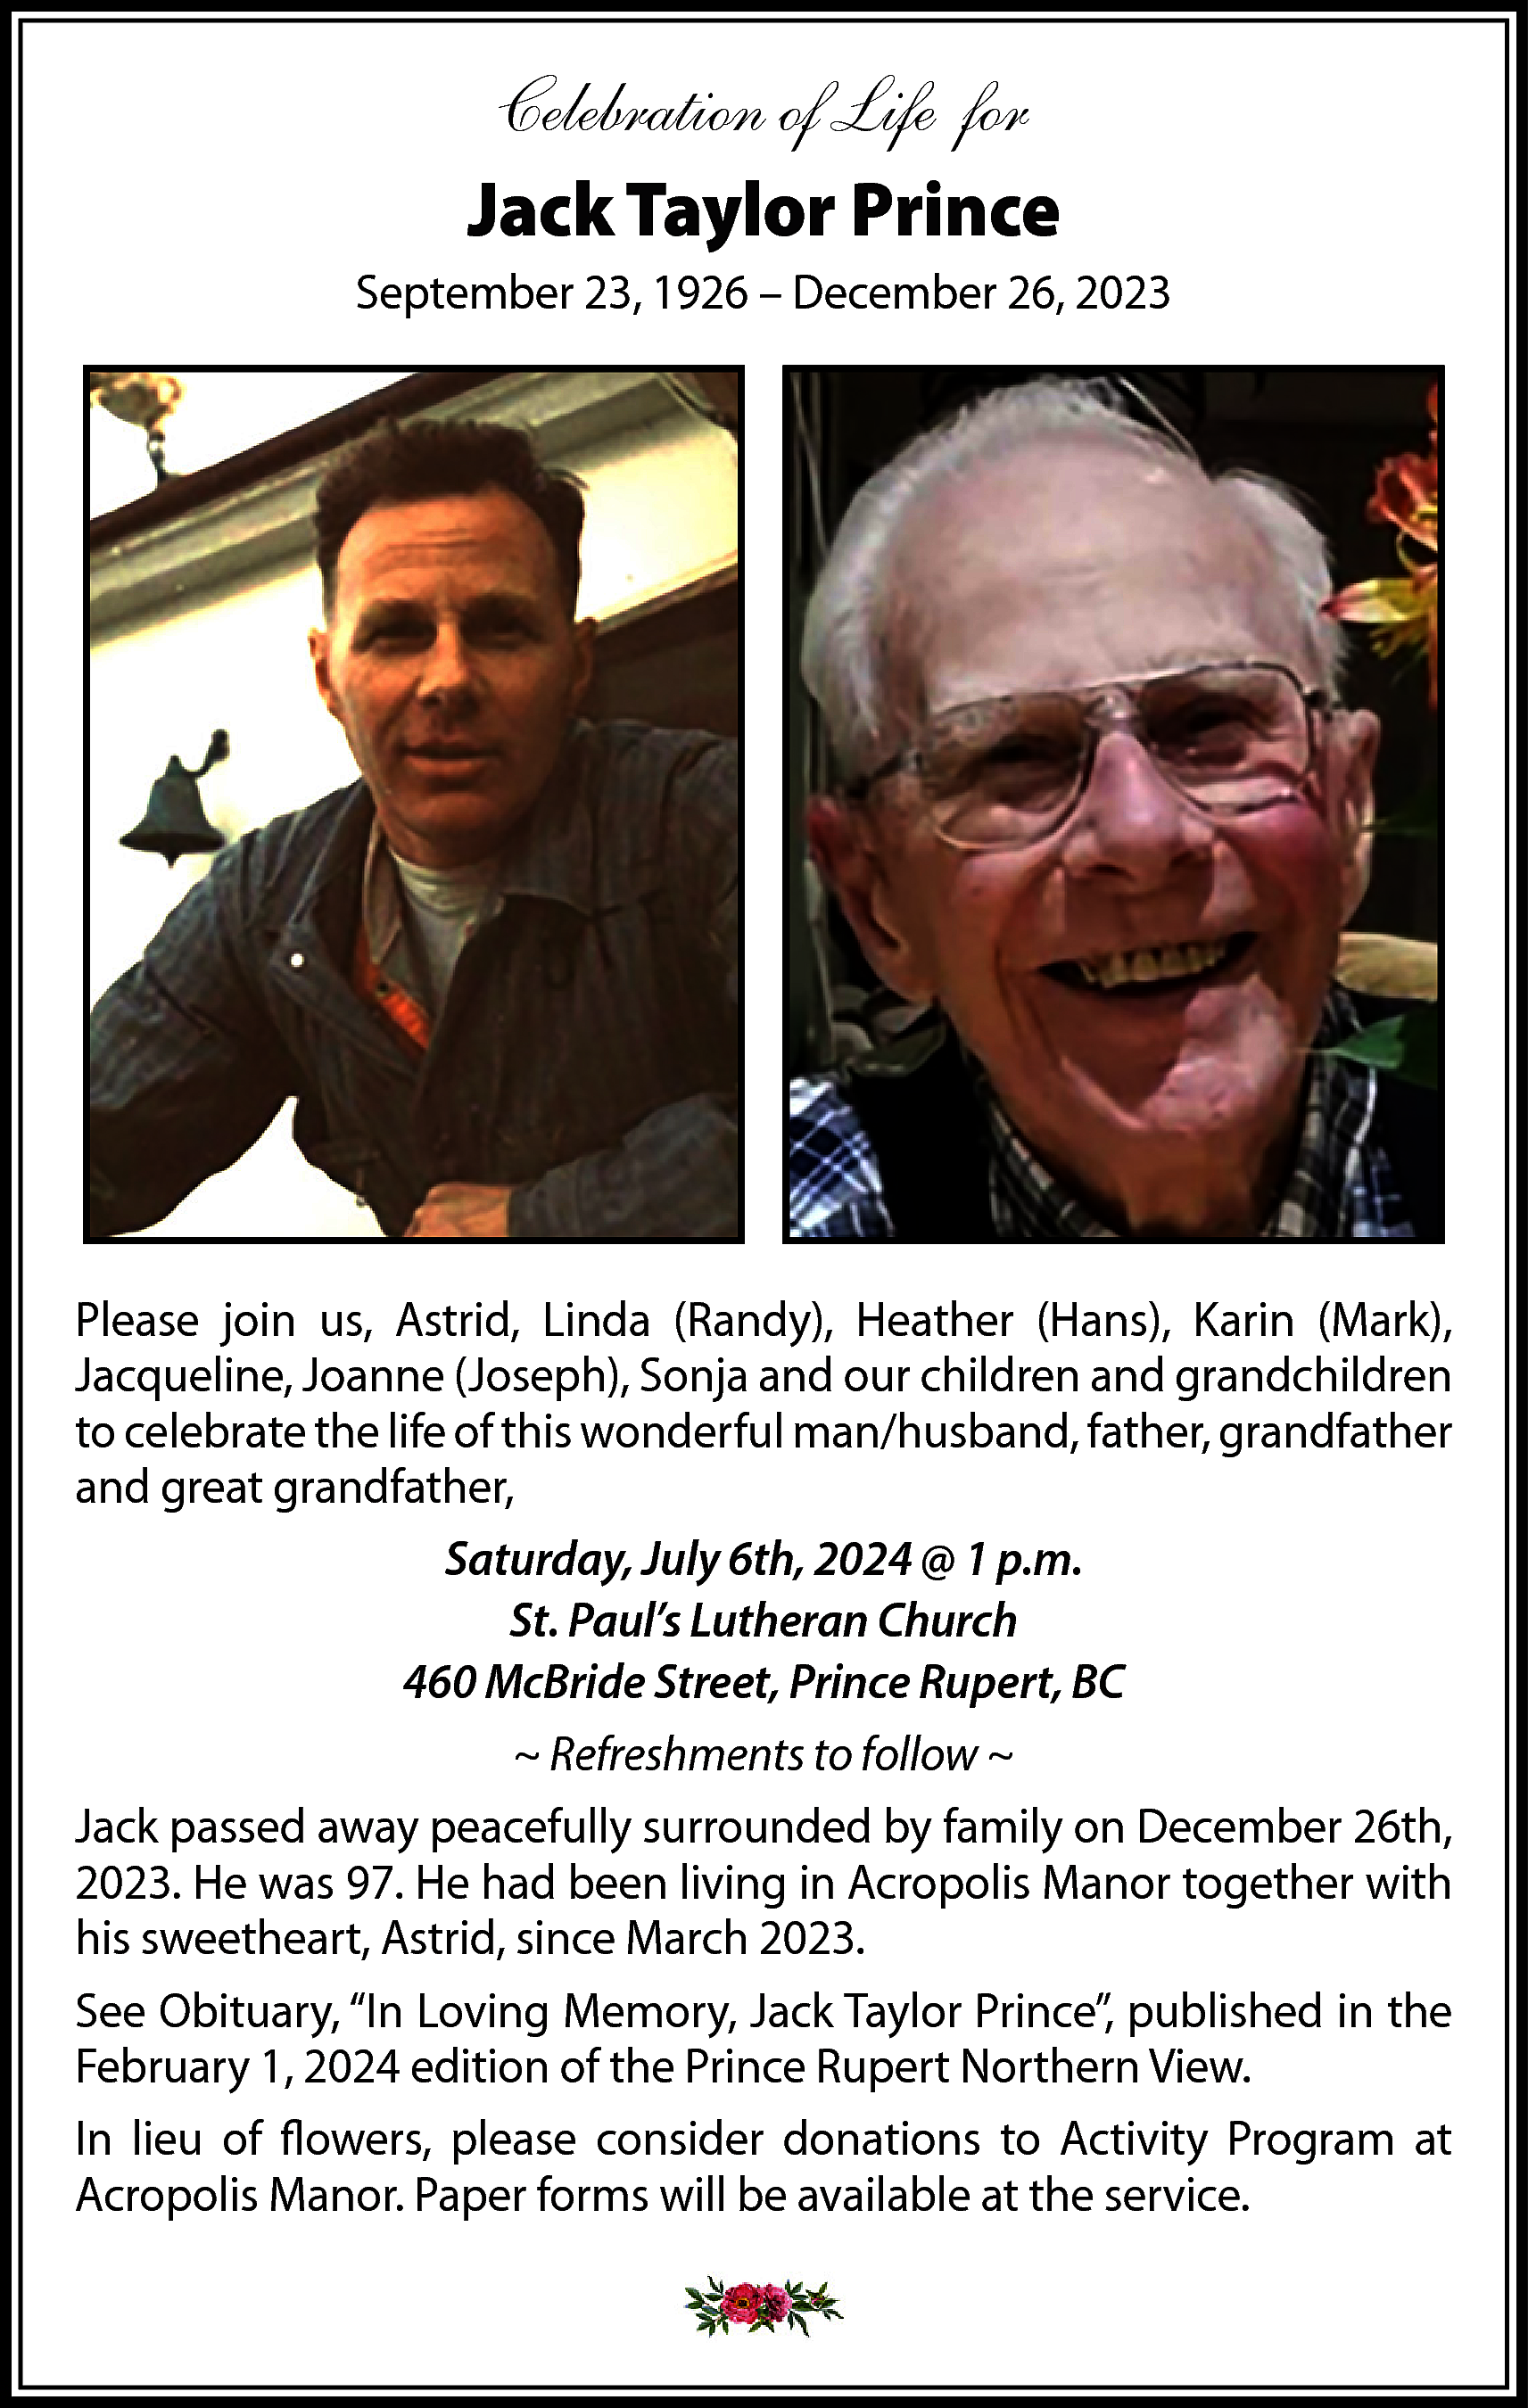 Celebration of Life for <br>Jack  Celebration of Life for  Jack Taylor Prince  September 23, 1926 – December 26, 2023    Please join us, Astrid, Linda (Randy), Heather (Hans), Karin (Mark),  Jacqueline, Joanne (Joseph), Sonja and our children and grandchildren  to celebrate the life of this wonderful man/husband, father, grandfather  and great grandfather,  Saturday, July 6th, 2024 @ 1 p.m.  St. Paul’s Lutheran Church  460 McBride Street, Prince Rupert, BC  ~ Refreshments to follow ~  Jack passed away peacefully surrounded by family on December 26th,  2023. He was 97. He had been living in Acropolis Manor together with  his sweetheart, Astrid, since March 2023.  See Obituary, “In Loving Memory, Jack Taylor Prince”, published in the  February 1, 2024 edition of the Prince Rupert Northern View.  In lieu of flowers, please consider donations to Activity Program at  Acropolis Manor. Paper forms will be available at the service.    